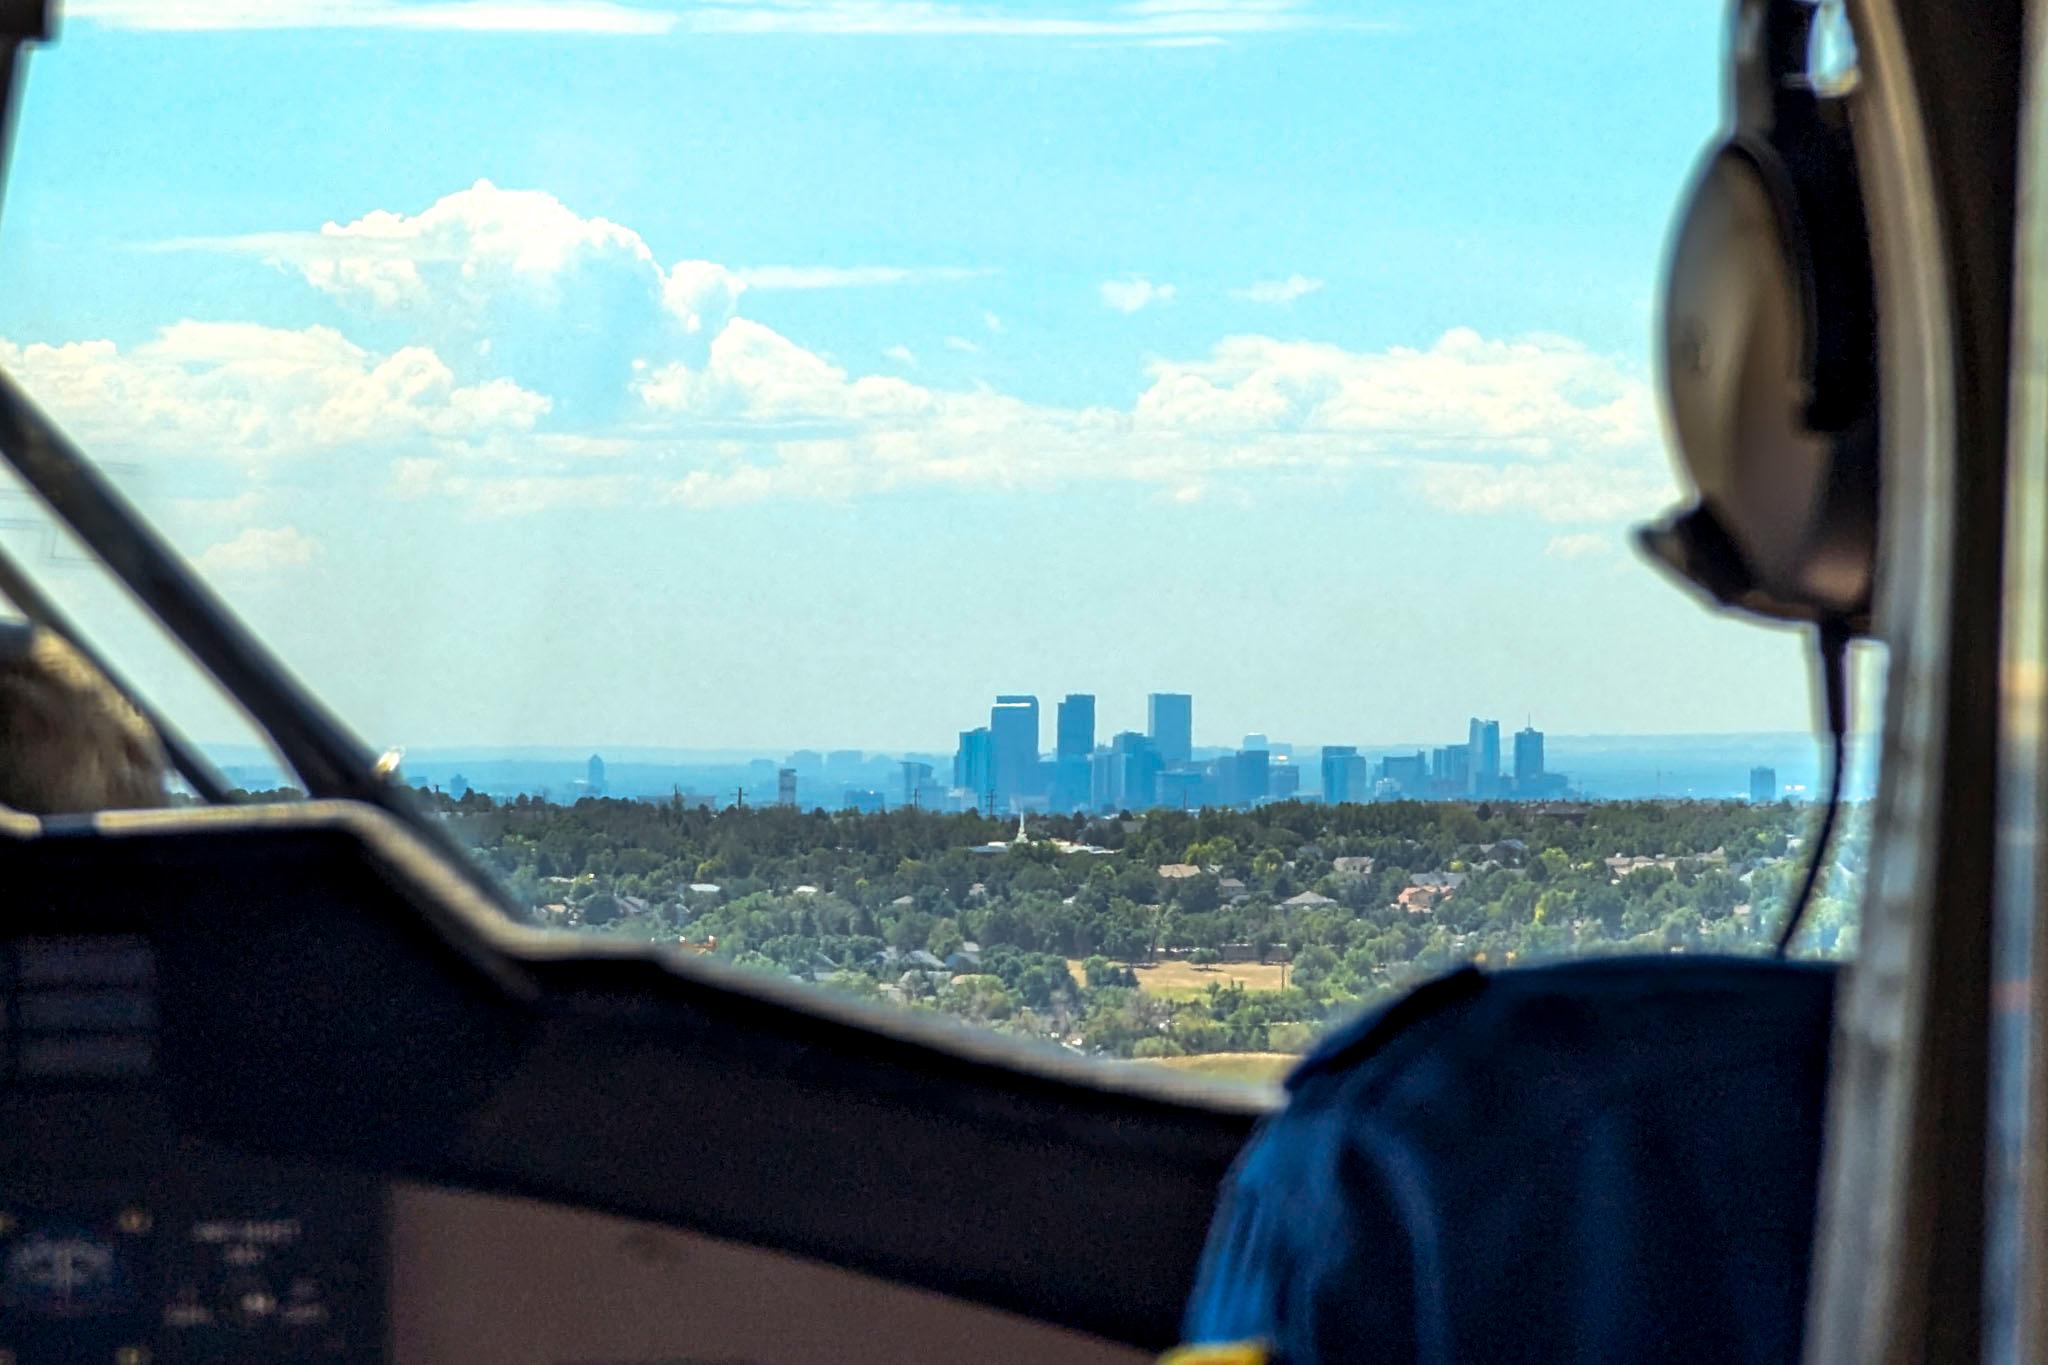 A view of downtown Denver from the cockpit inside a plane.